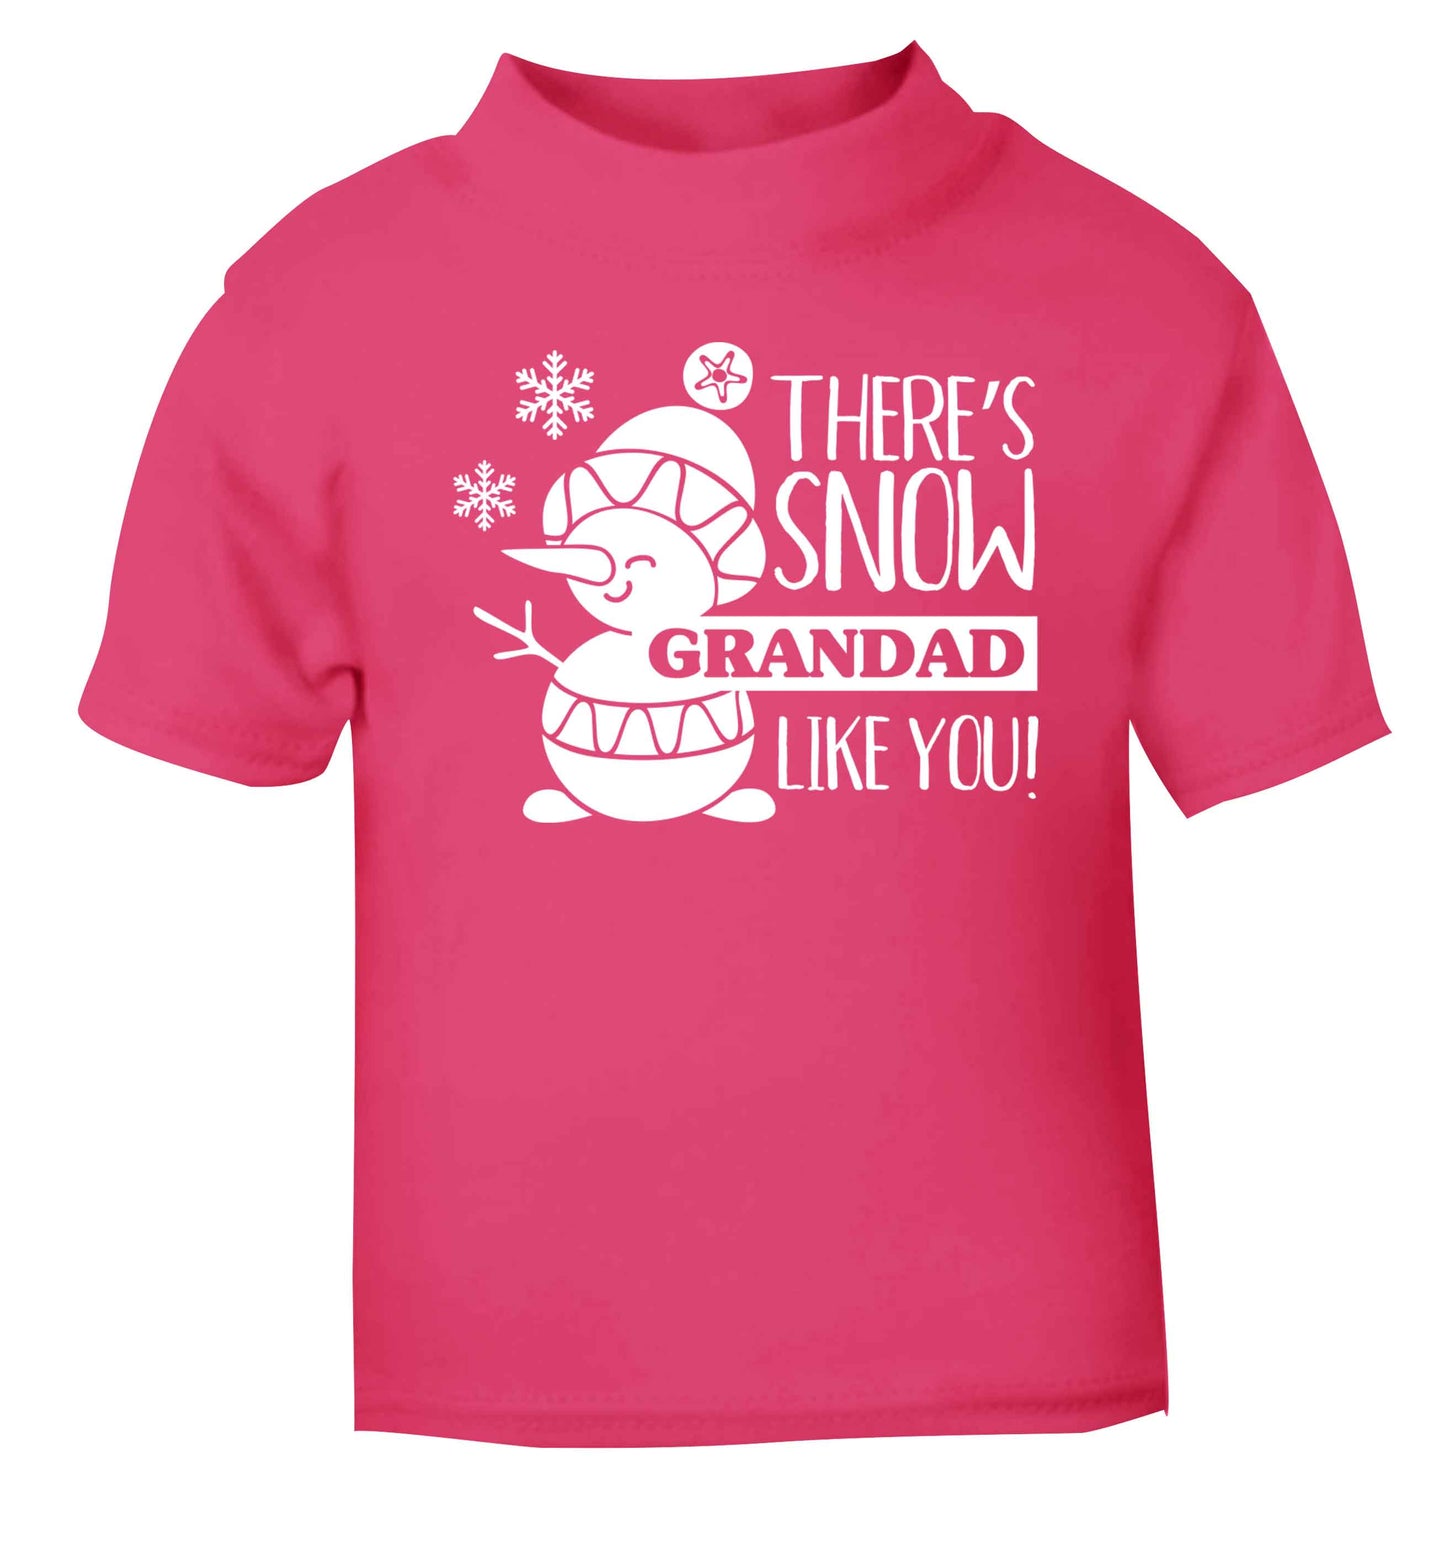 There's snow grandad like you pink baby toddler Tshirt 2 Years